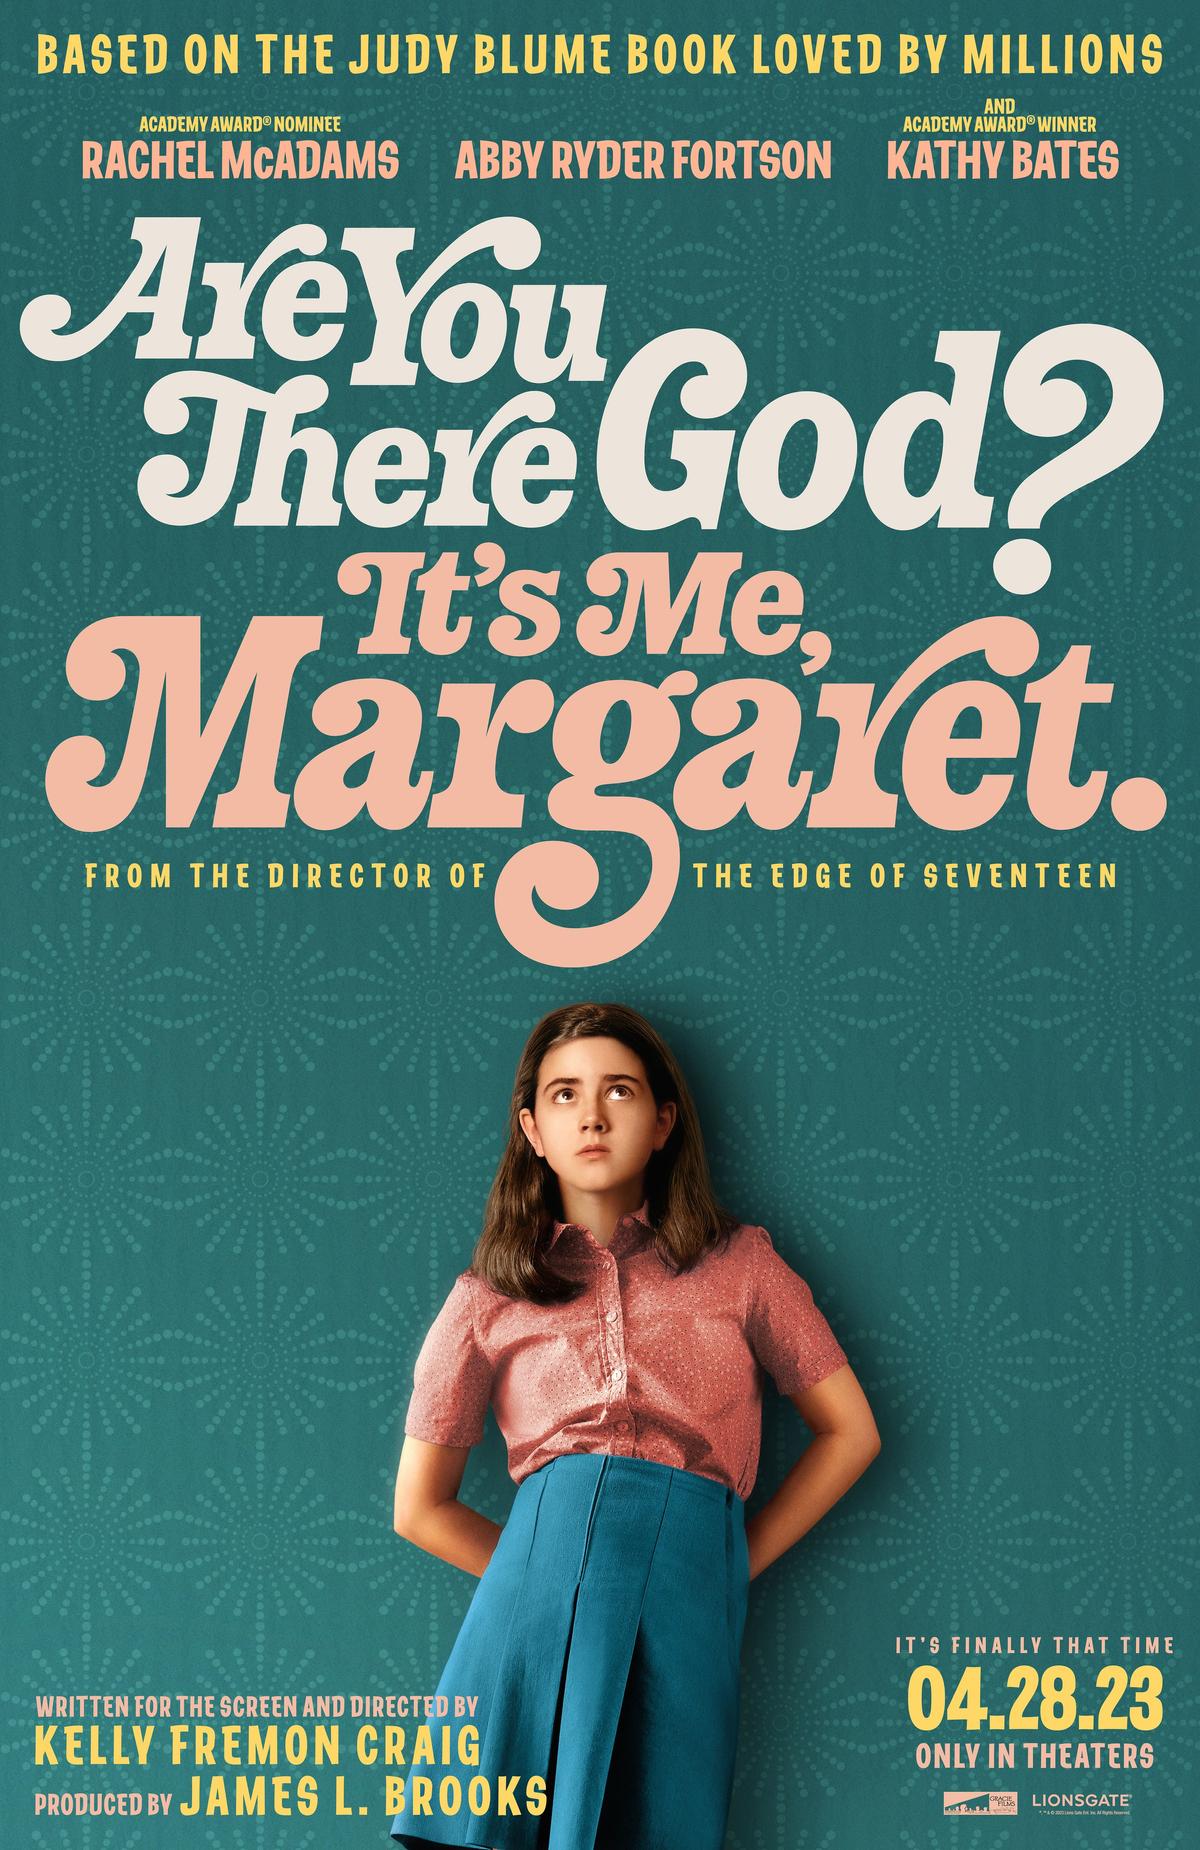 Movie poster for “Are You There God? It’s Me, Margaret.” (Dana Hawley/Lionsgate)